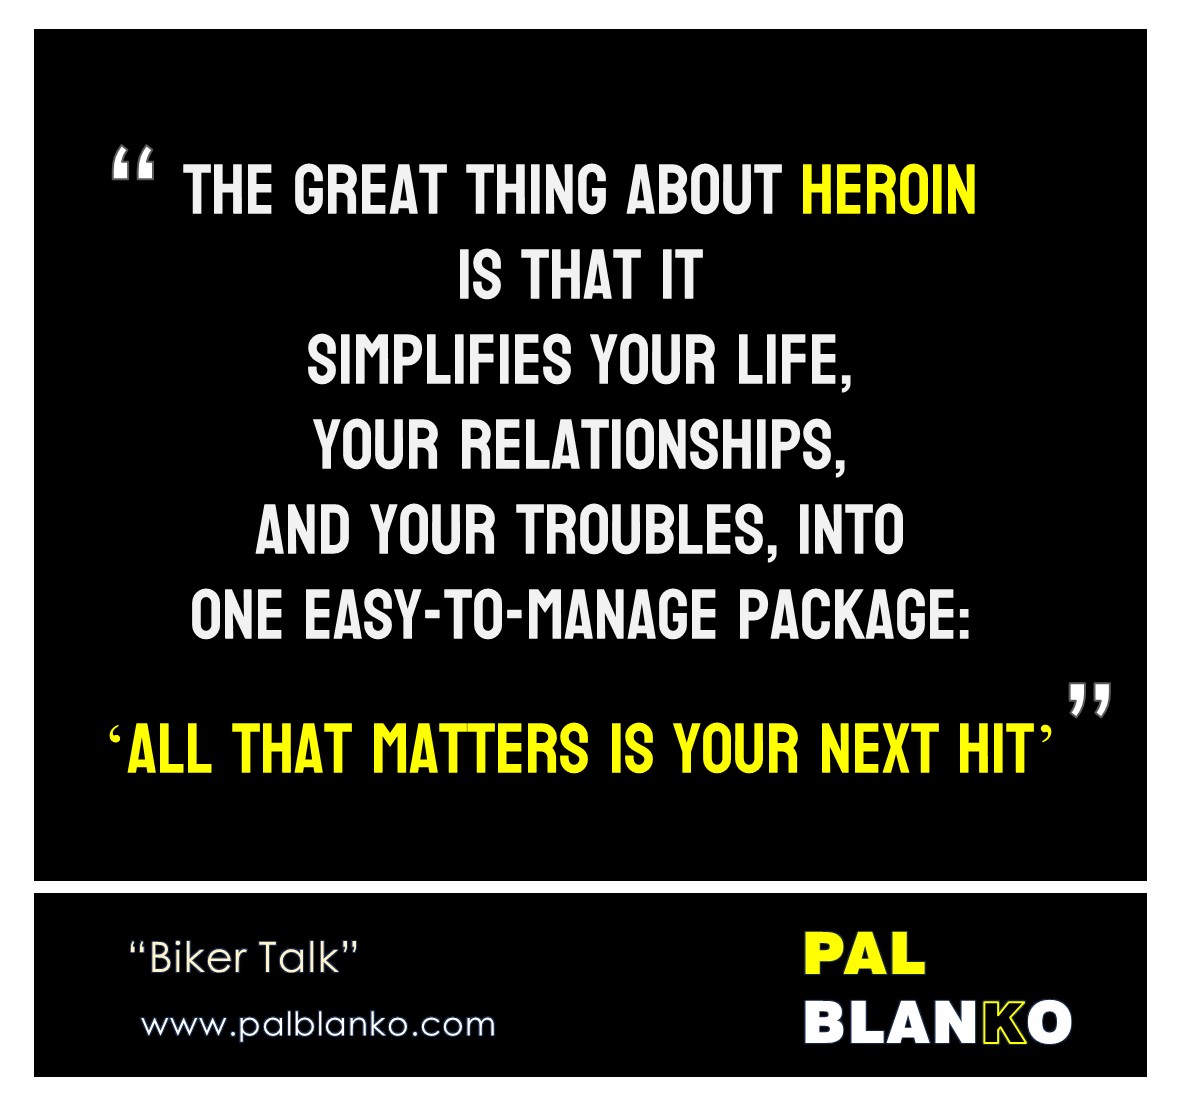 Pal Blanko - Biker Talk - "The Great Thing About Heroin..."